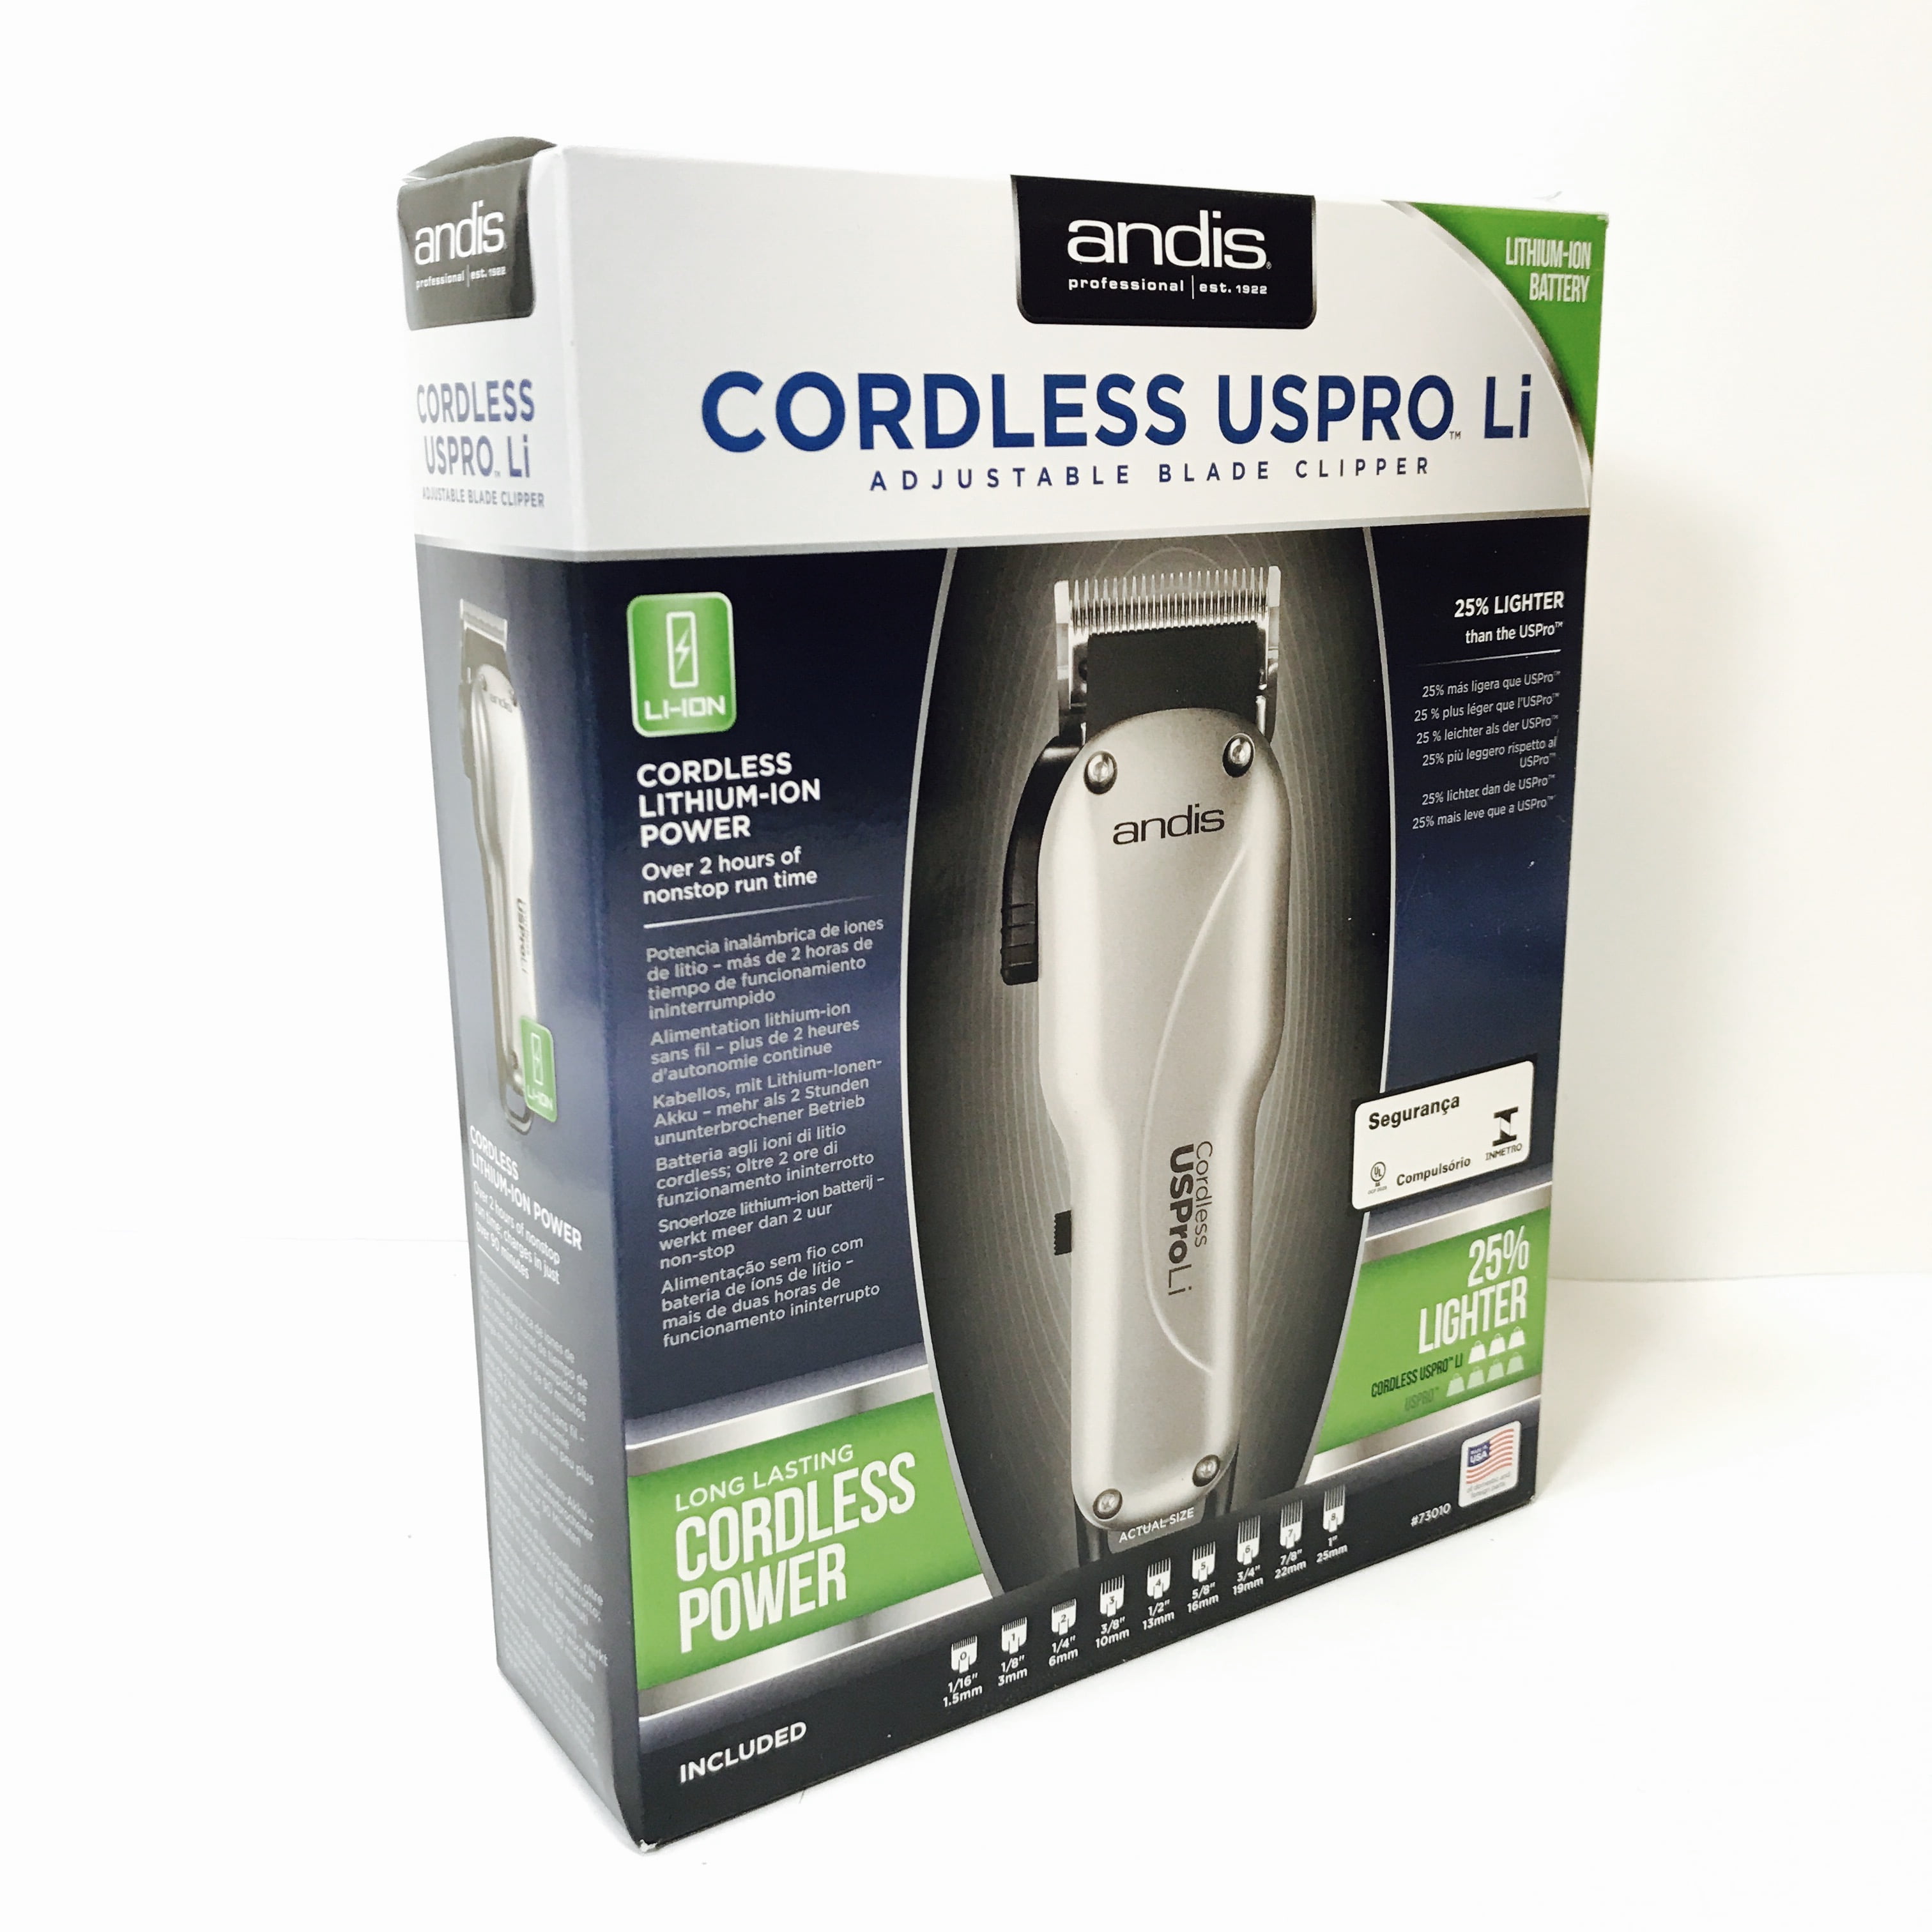 andis cordless uspro lithium adjustable clipper